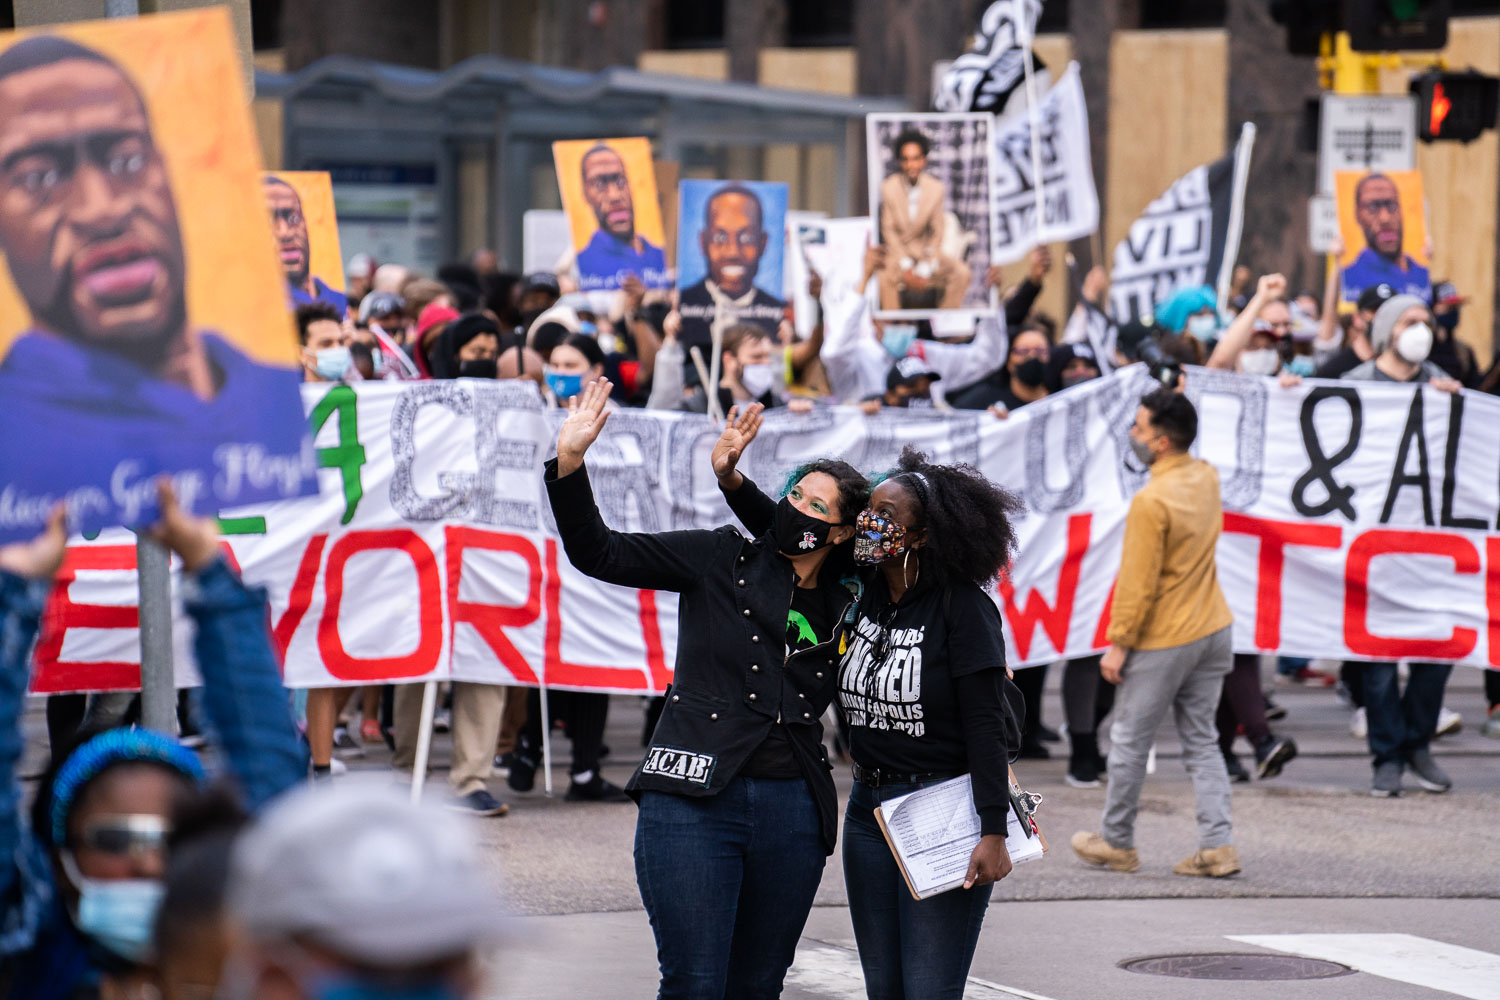 Protesters rally and march through Downtown Minneapolis on the day opening statements began in the Derek Chauvin murder trial. Chauvin is accused of murdering George Floyd on May 25th, 2020.